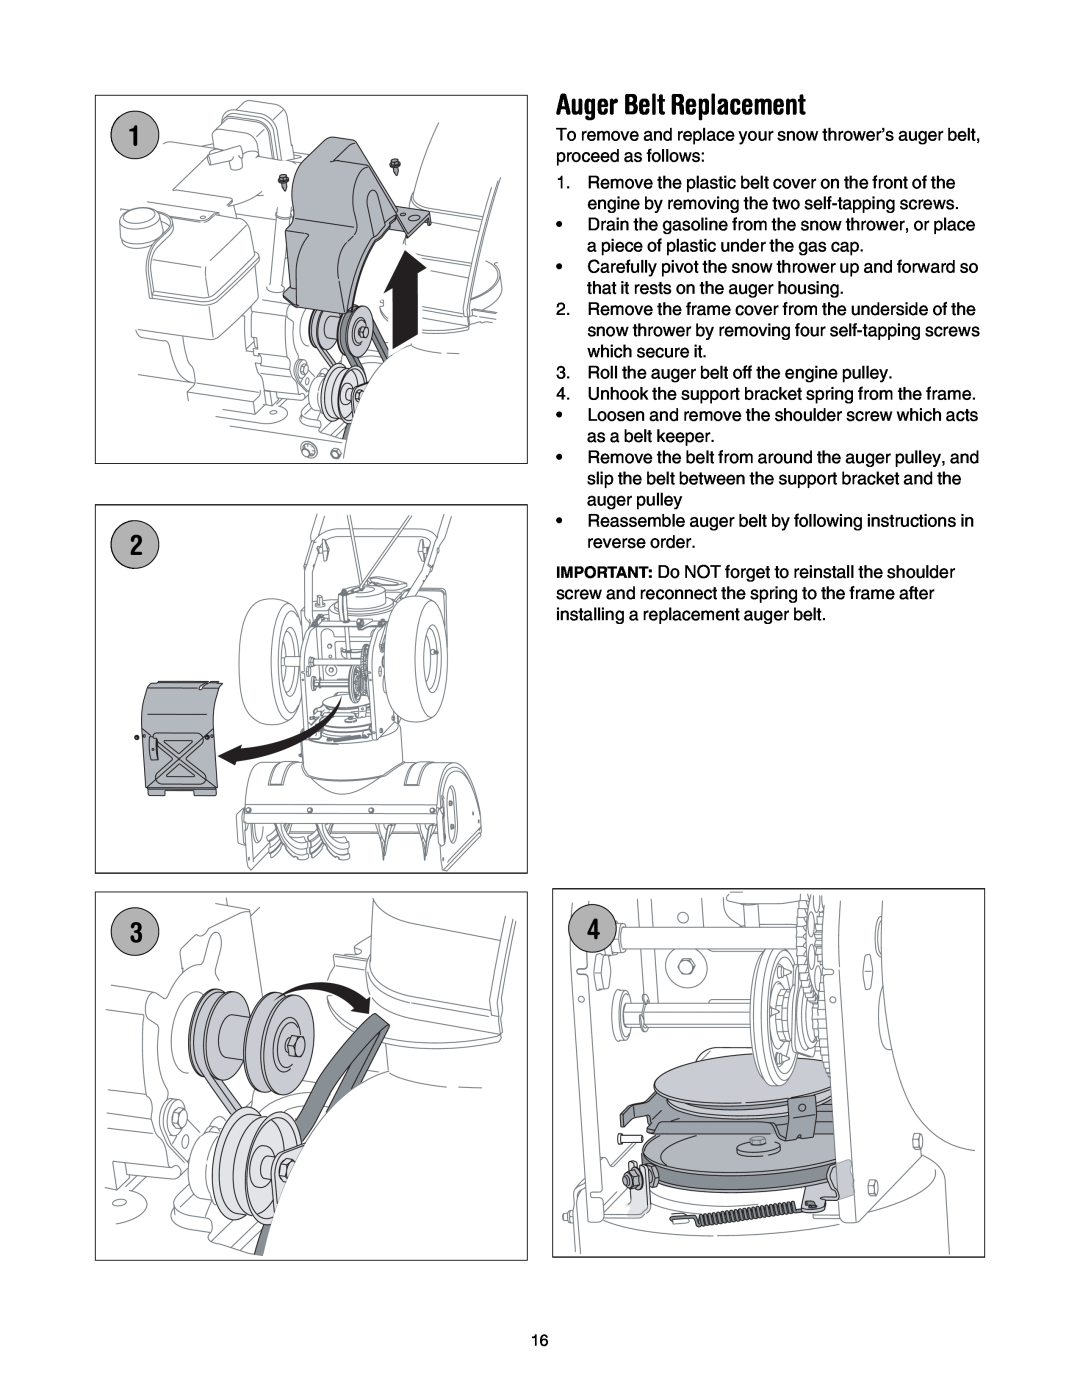 MTD L-Style manual Auger Belt Replacement 